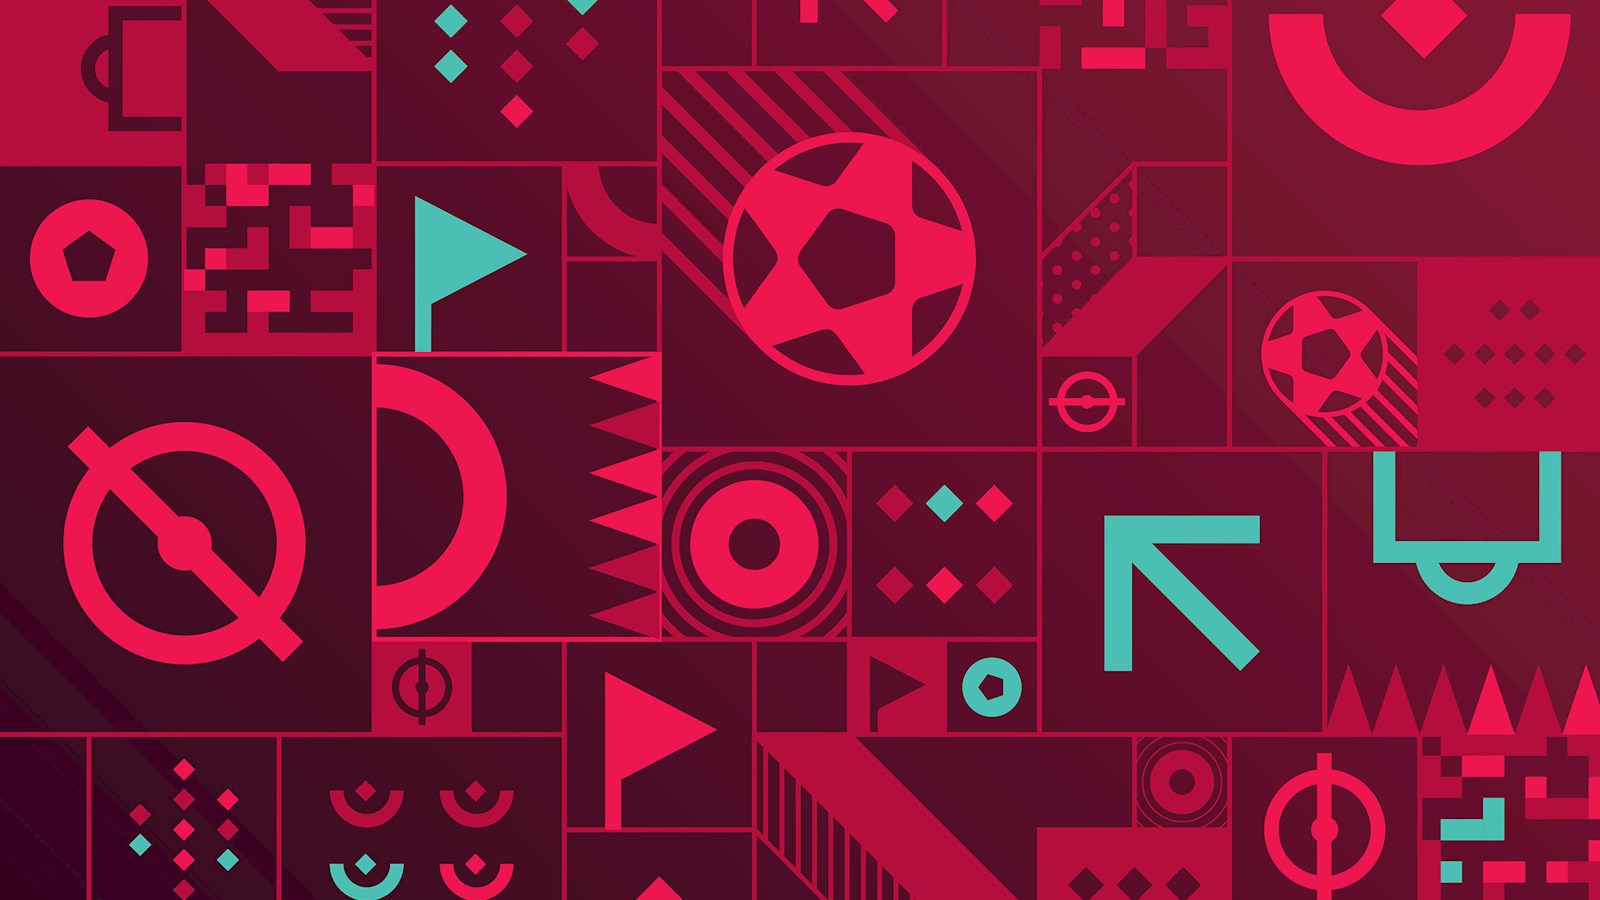 Red and turquoise graphic with footballs and icons 